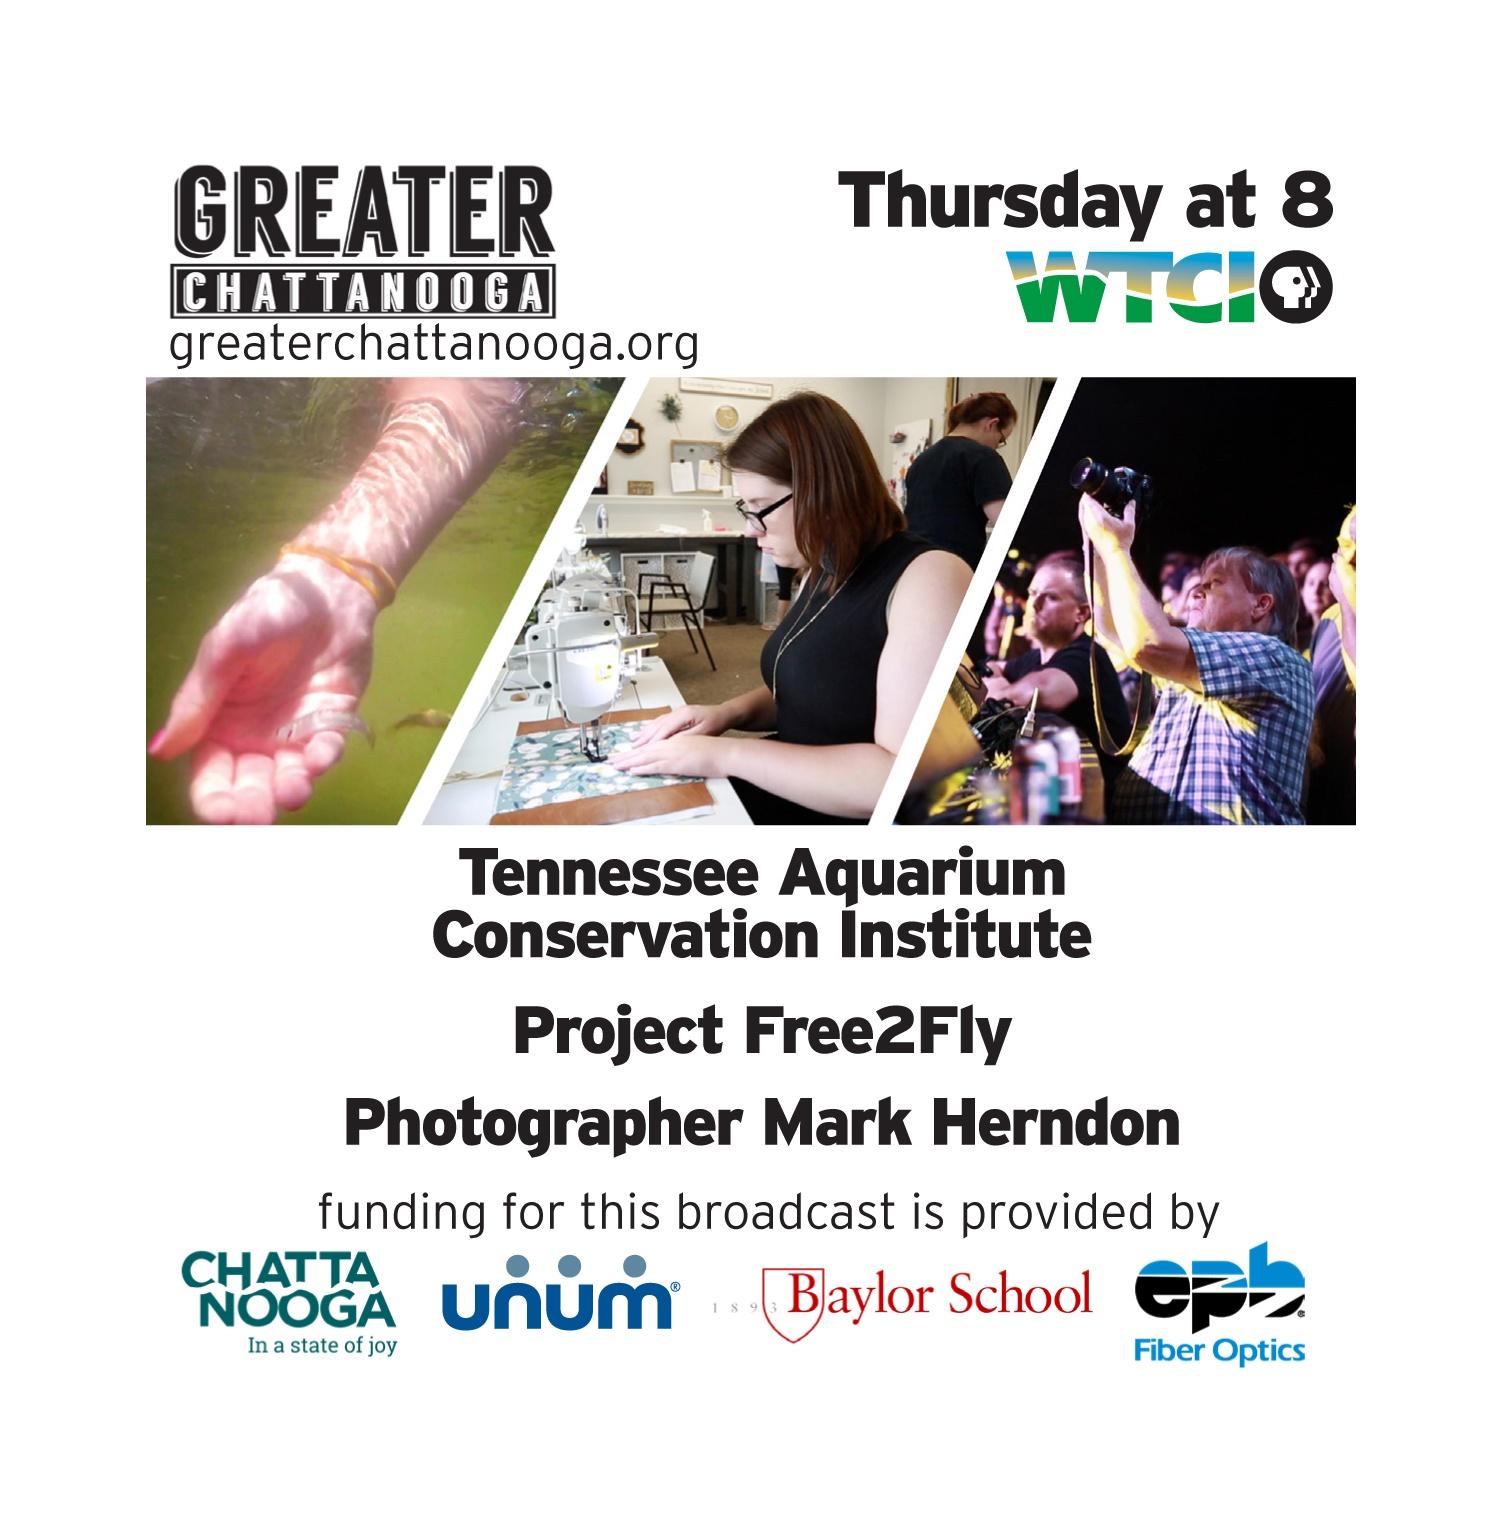 Images of The Tennessee Aquarium Conservation Institute, Project Free2Fly, and photographer Mark Herndon with text that reads "Greater Chattanooga Thursday at 8, funding for this broadcast is provided by Chattanooga, Unum, Baylor School, EPB"